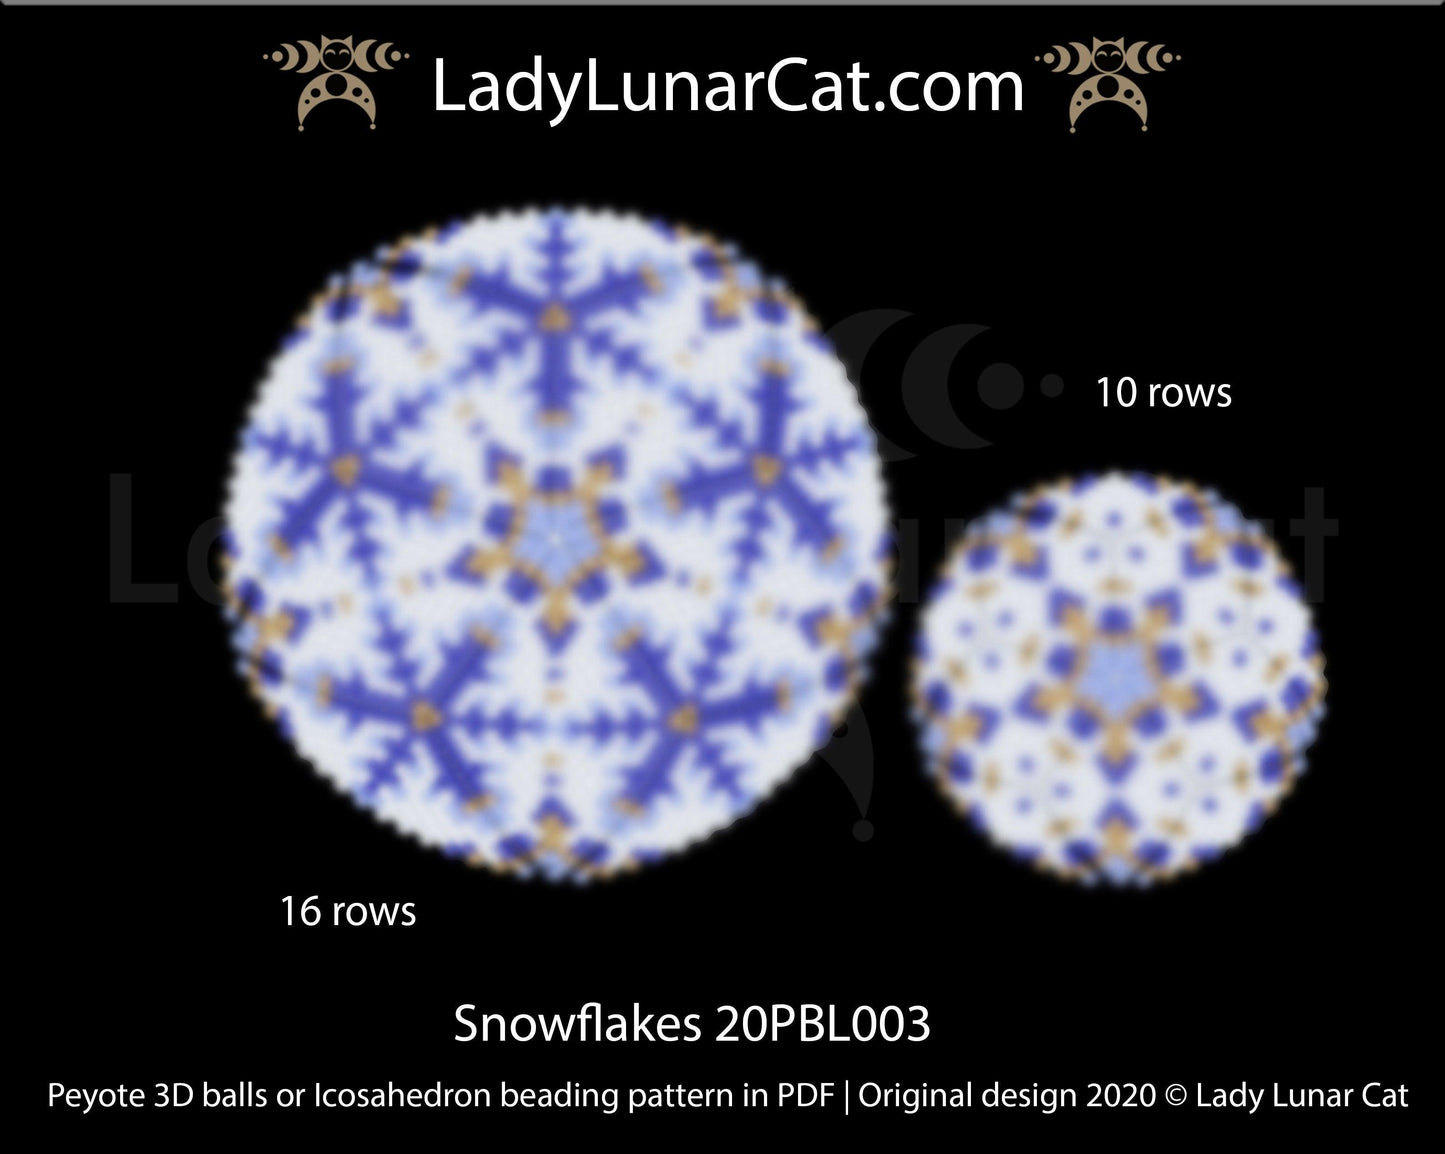 Peyote 3d ball pattern for beadweaving | Beaded Icosahedron Snowflakes 20PBL003 16 rows and 10 rows LadyLunarCat